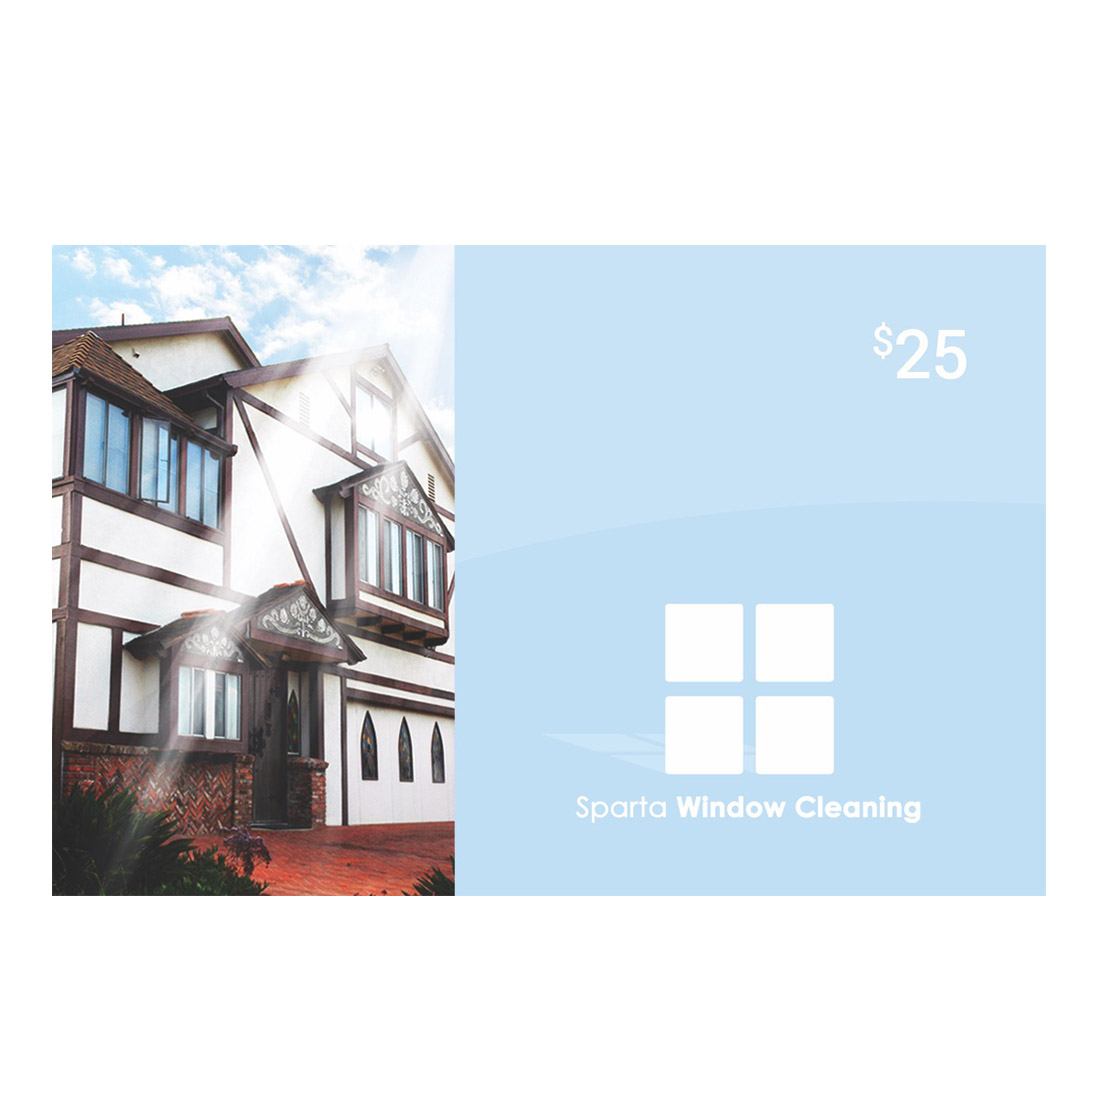 Gift Card Designs - House - Front View